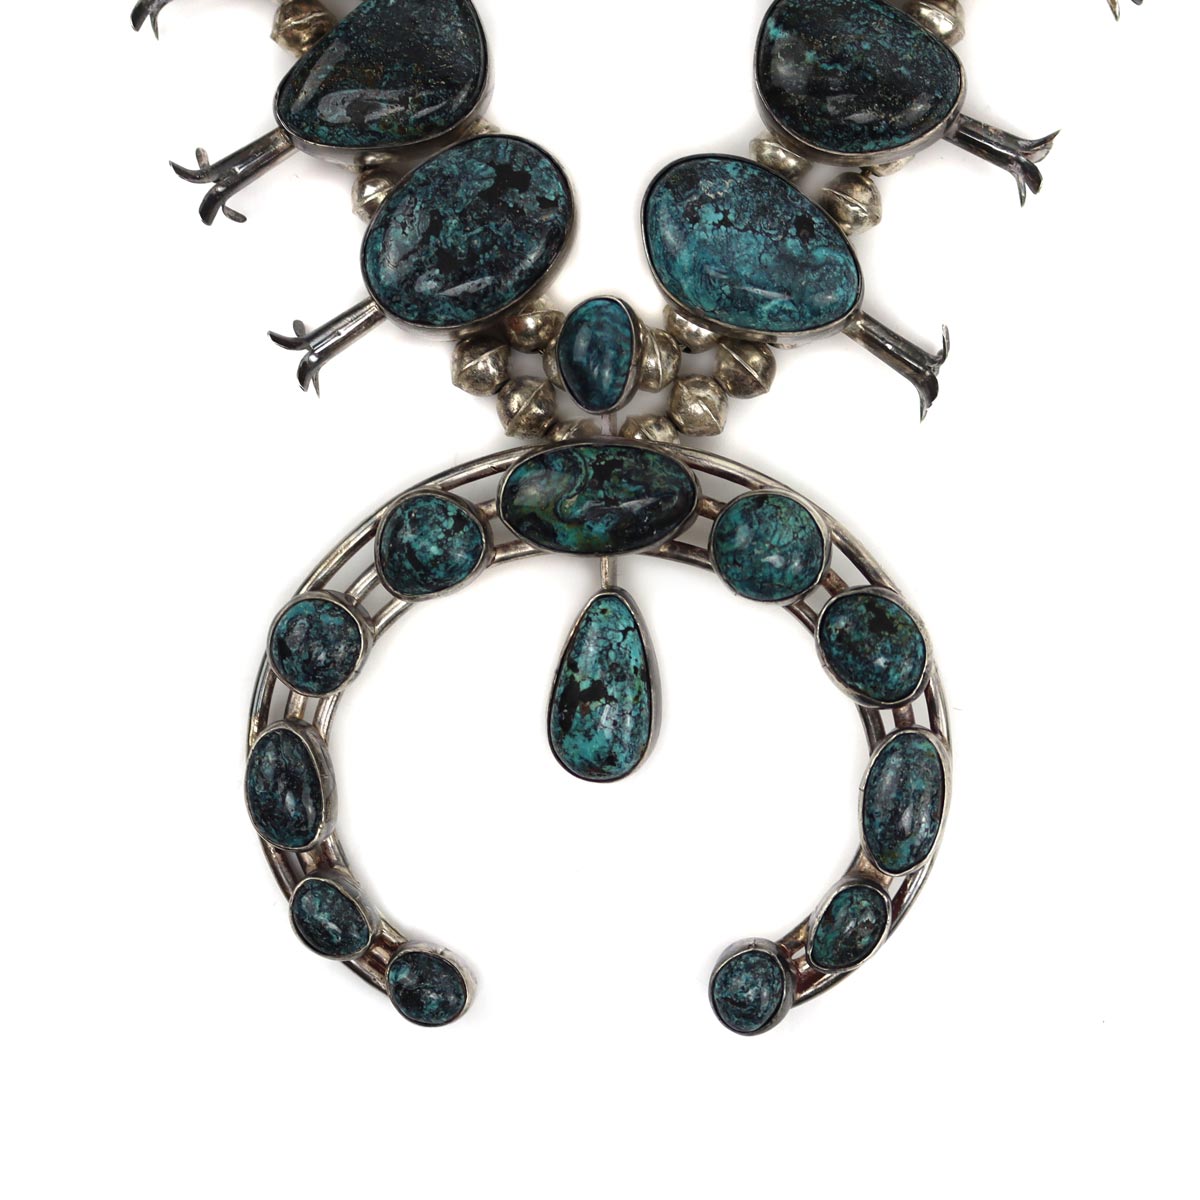 Navajo Turquoise and Silver Squash Blossom Necklace and Post Earrings Set c. 1960-80s (J15274-CO)